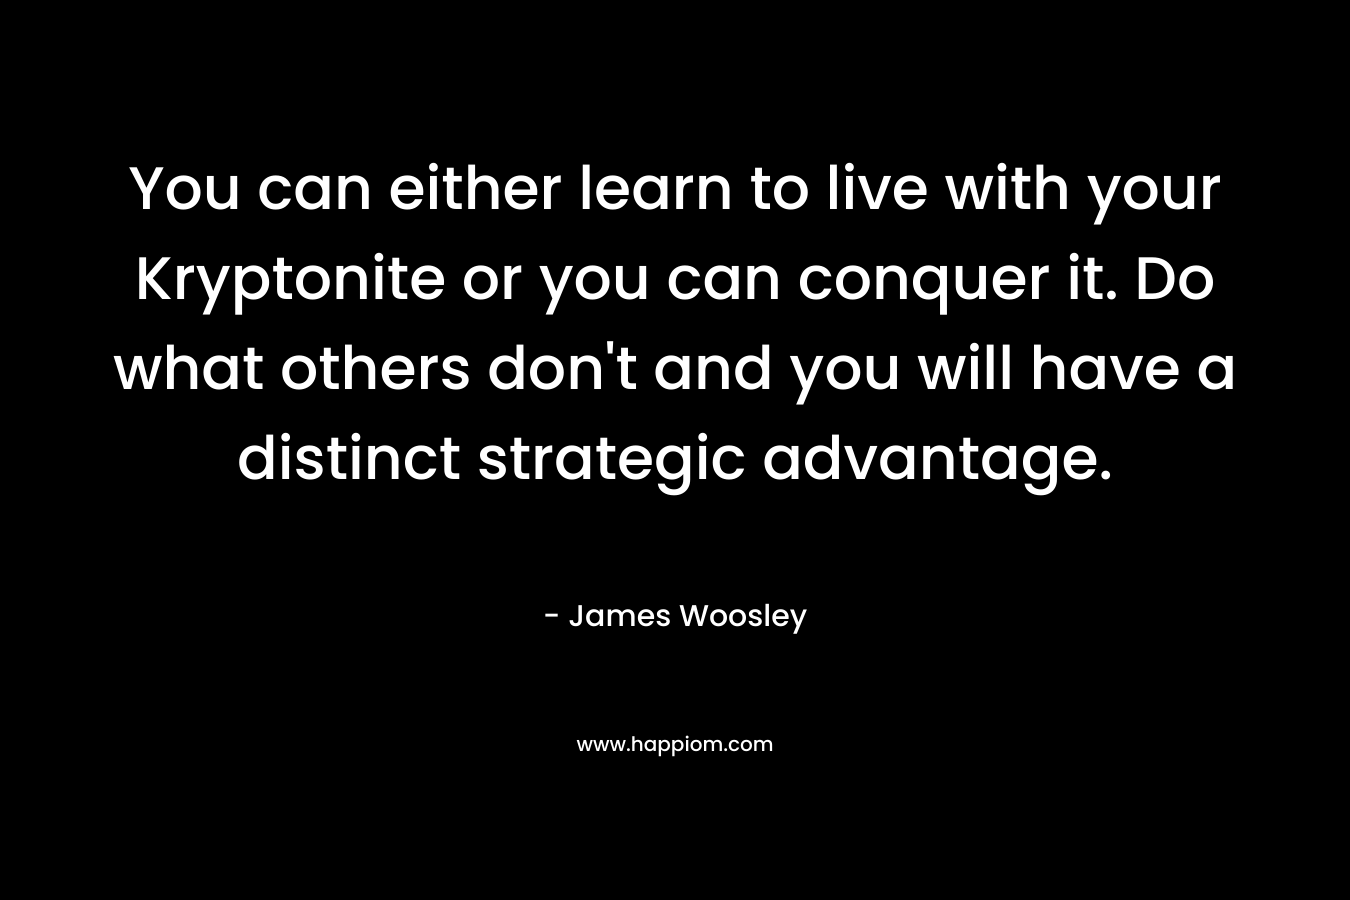 You can either learn to live with your Kryptonite or you can conquer it. Do what others don’t and you will have a distinct strategic advantage. – James Woosley